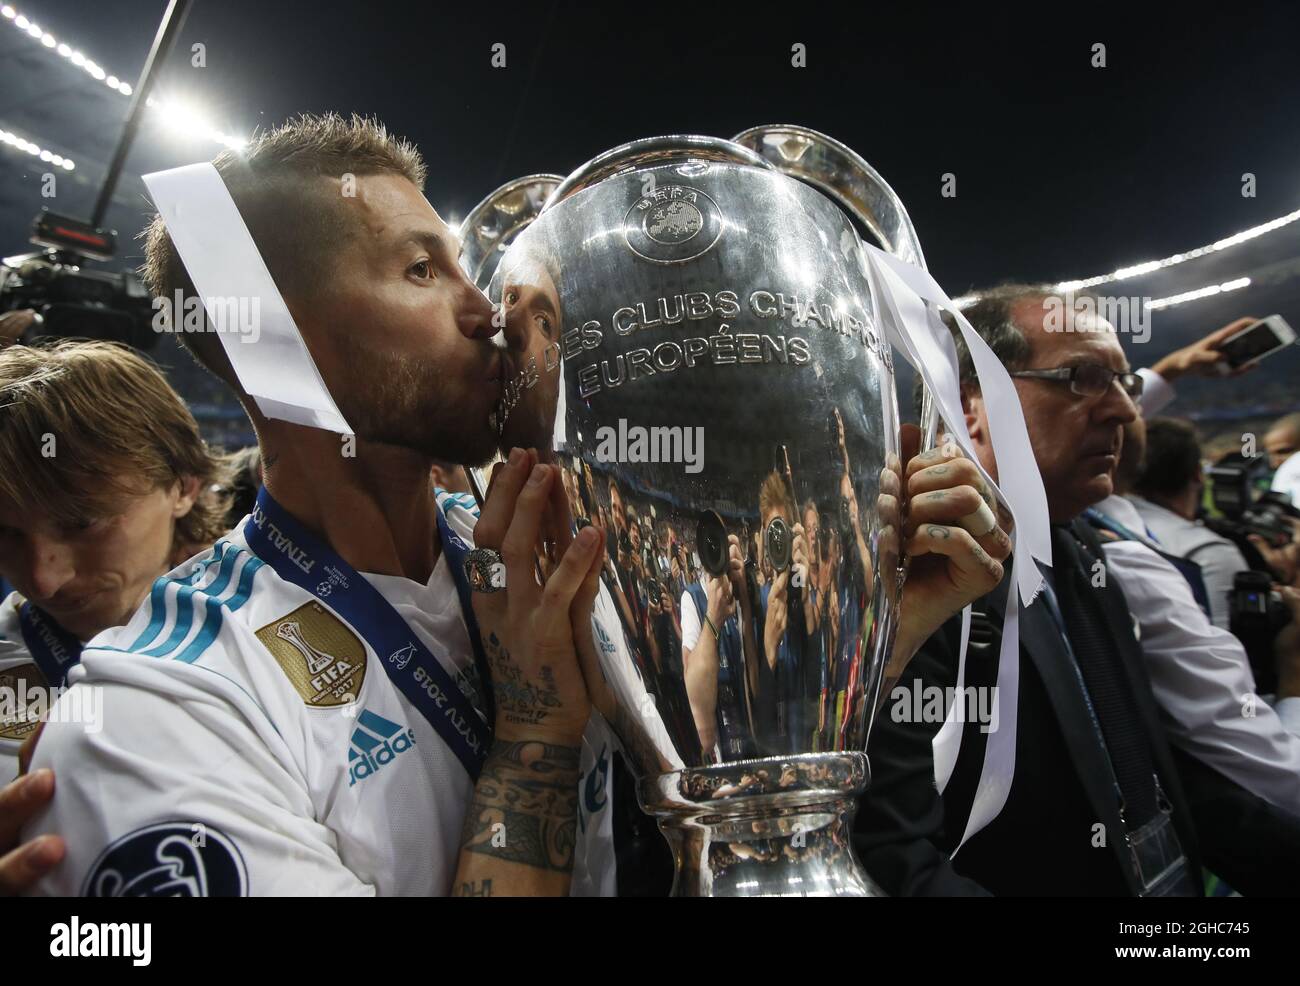 Sergio Ramos of Real Madrid kisses the Champions League trophy during the  UEFA Champions League Final match at the NSK Olimpiyskiy Stadium, Kiev.  Picture date 26th May 2018. Picture credit should read: